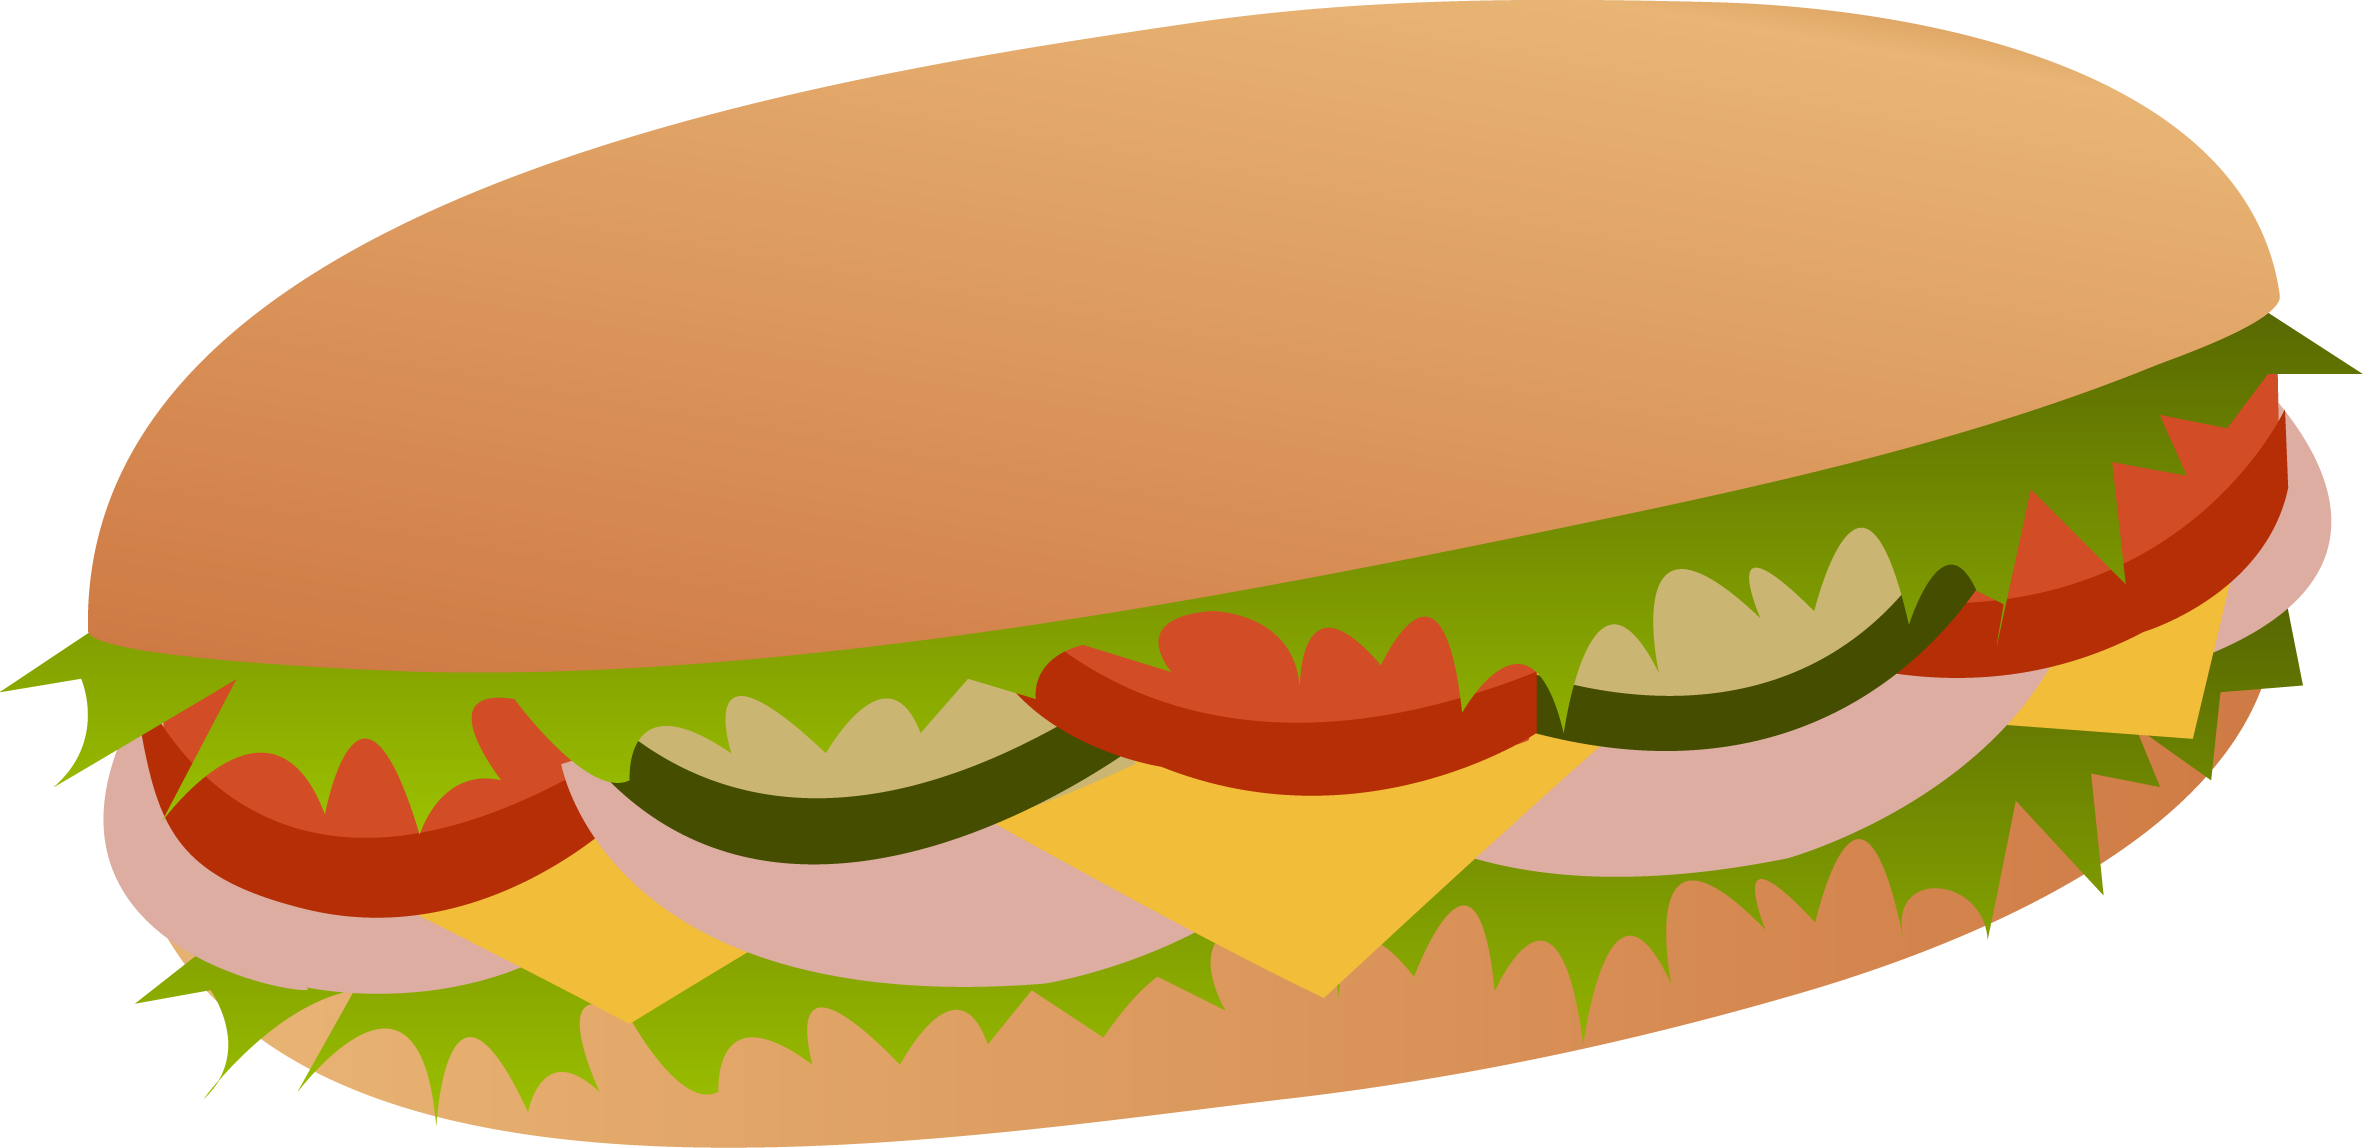 Clip Arts Related To : Subway Sandwich Double Bacon Egg And Cheese Subway. ...